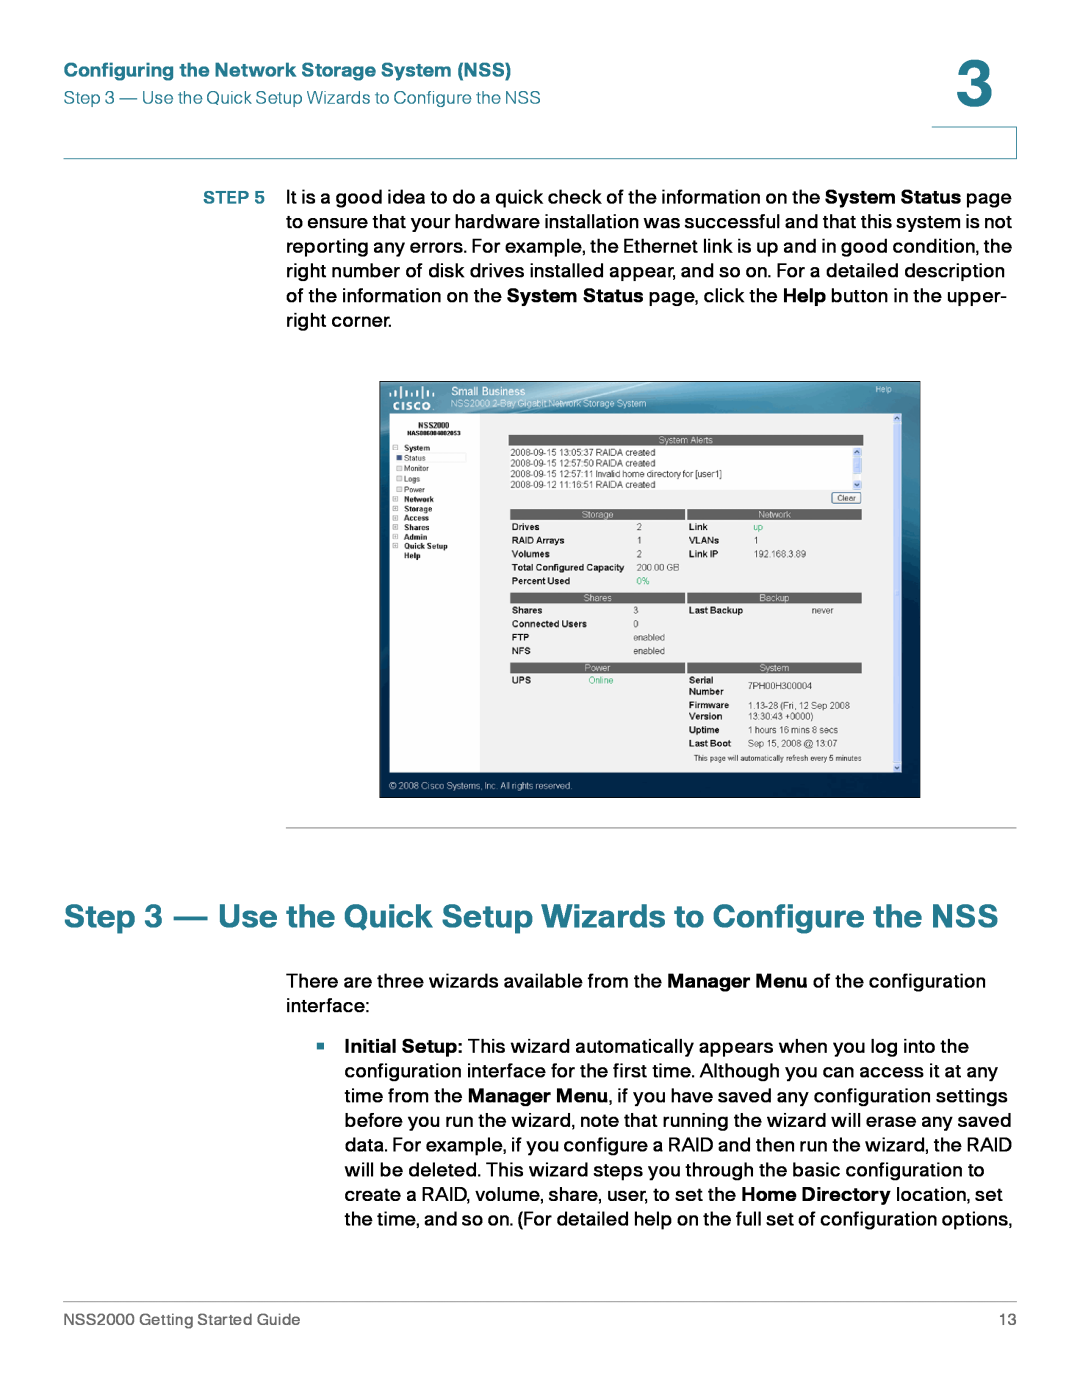 Cisco Systems NSS2000 Series Use the Quick Setup Wizards to Configure the NSS, Configuring the Network Storage System NSS 